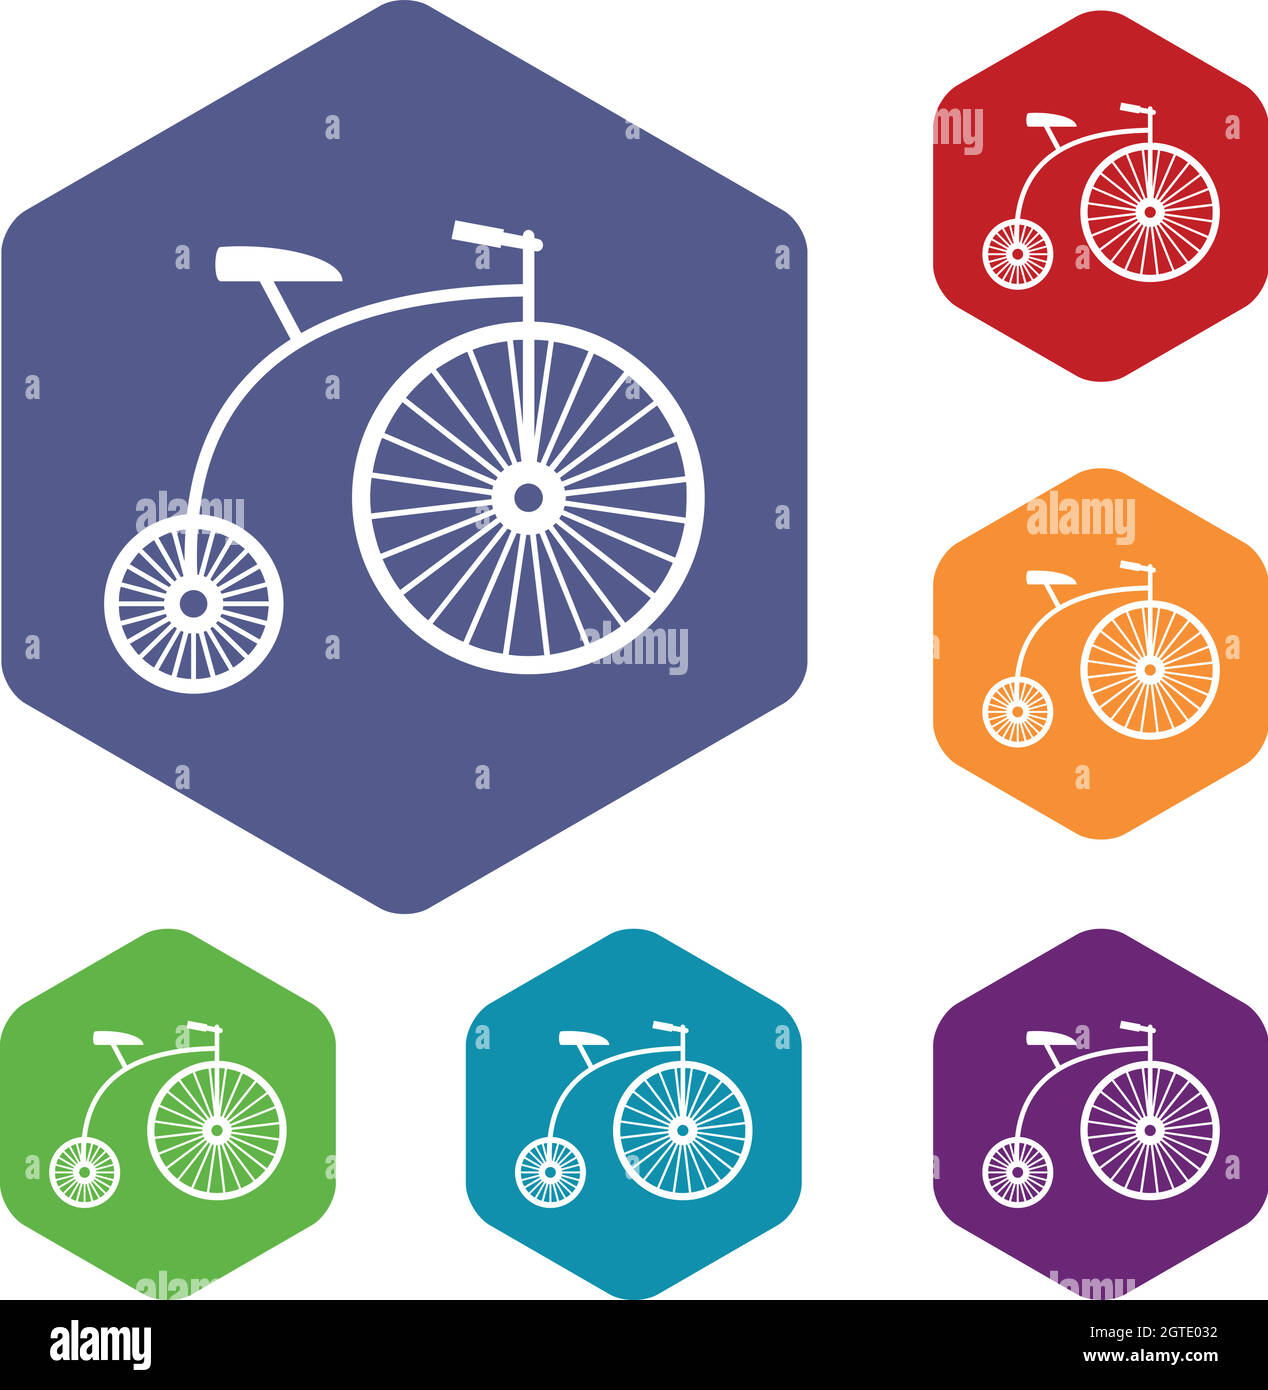 Penny-farthing icons set Stock Vector